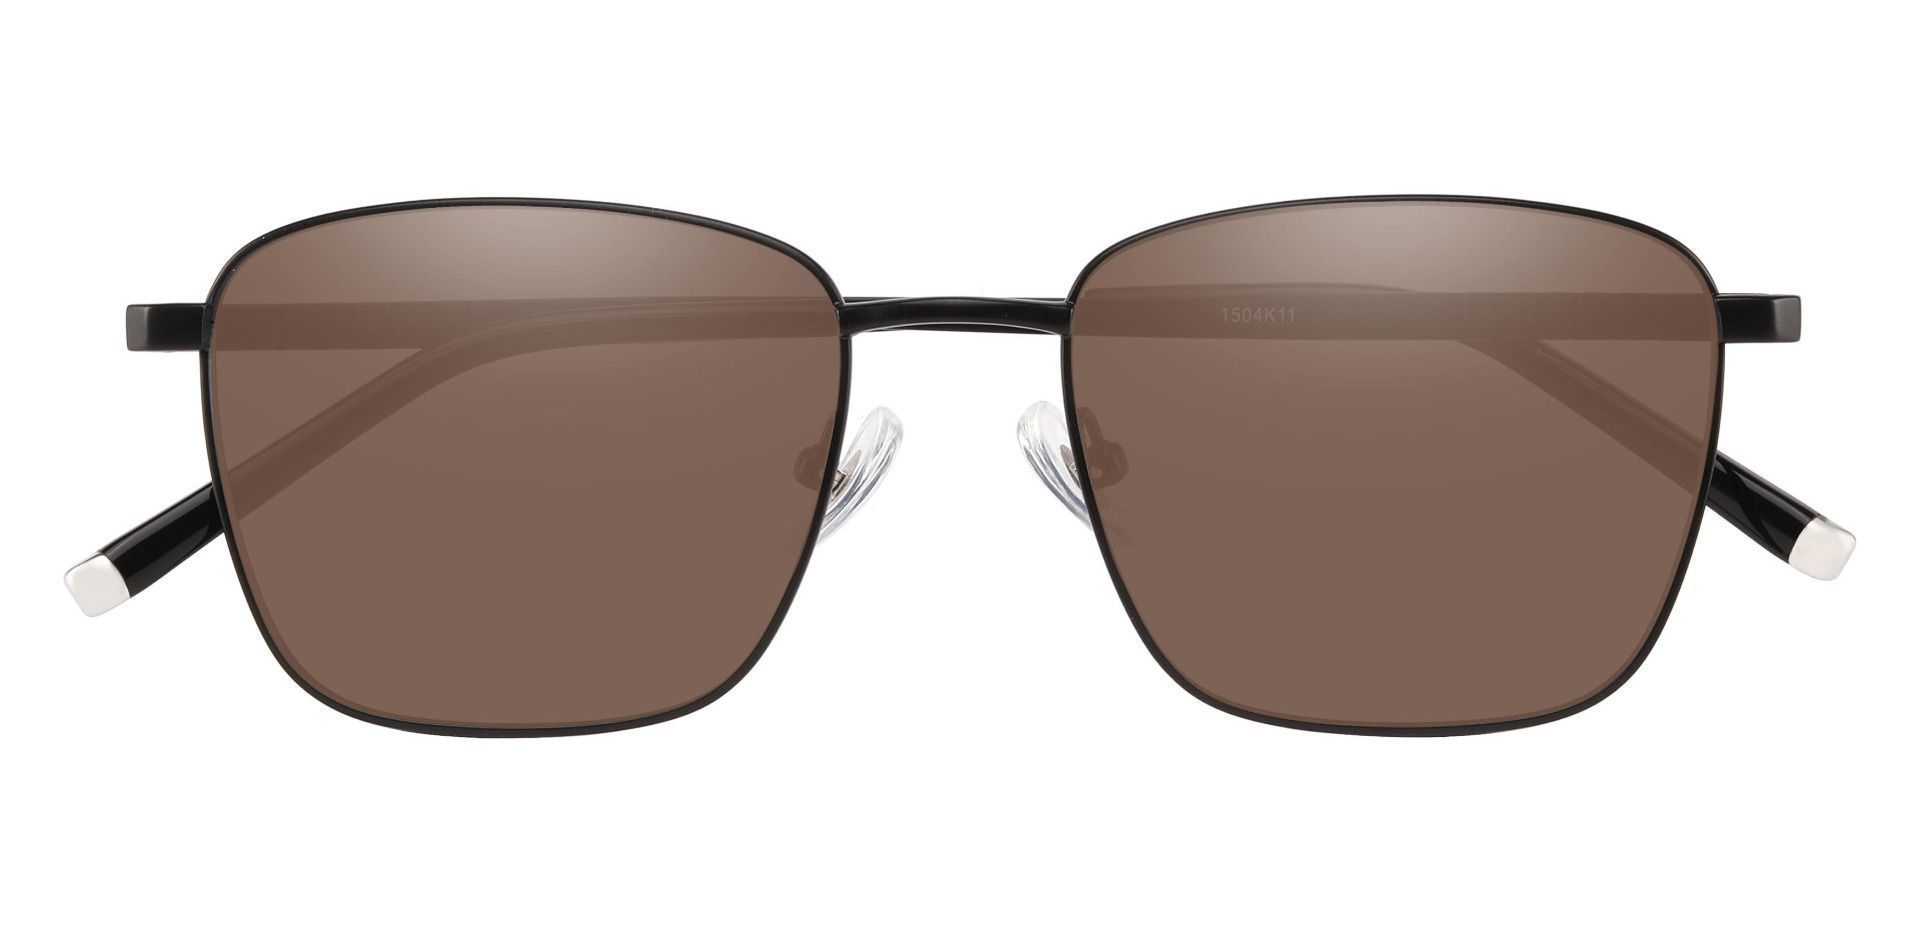 May Square Non-Rx Sunglasses - Black Frame With Brown Lenses